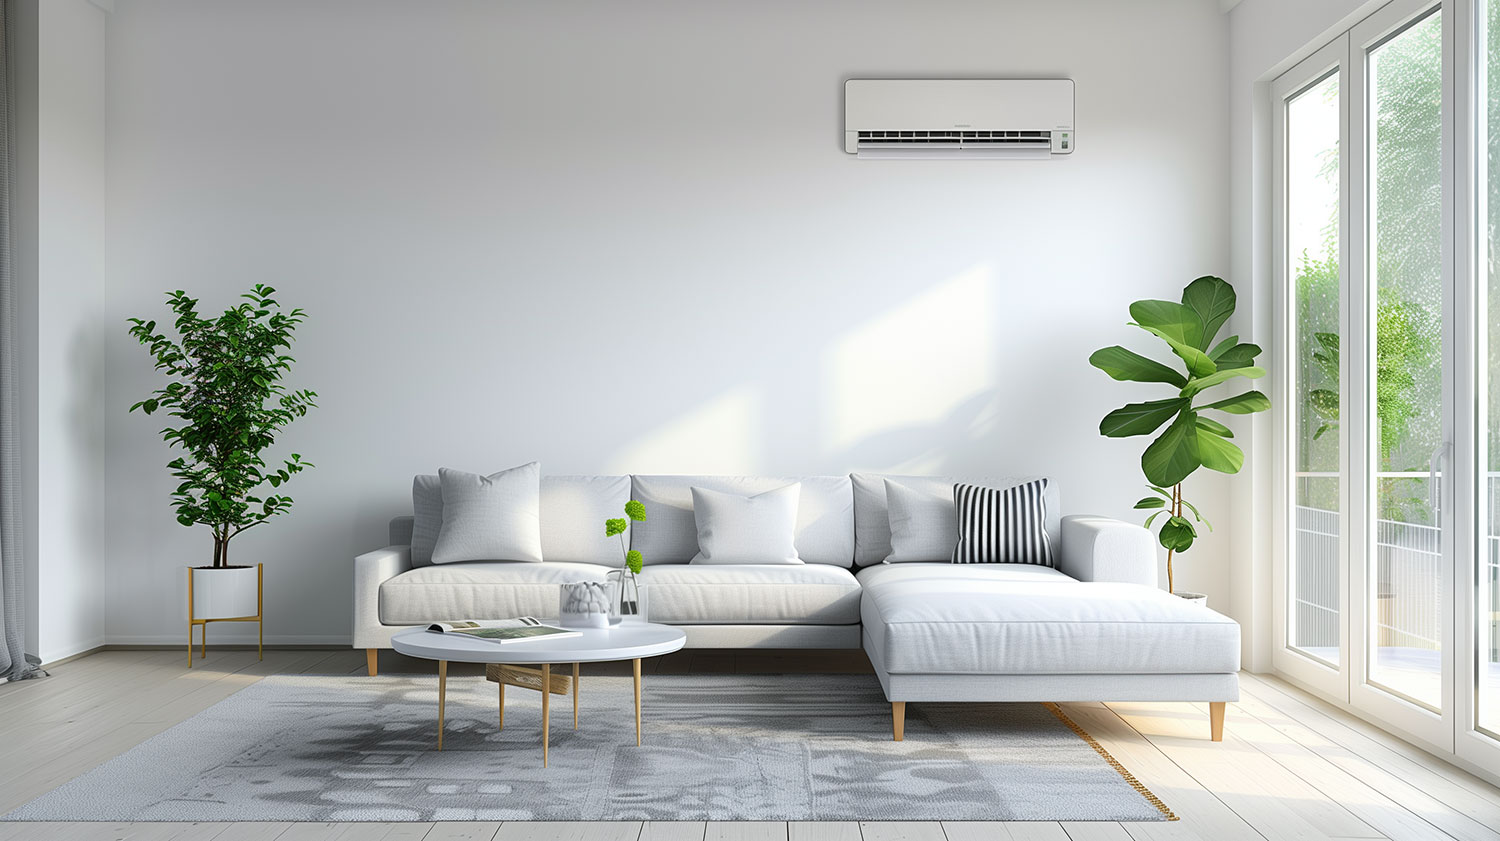 HVAC technicians from Battavio can efficiently reduce allergens in homes